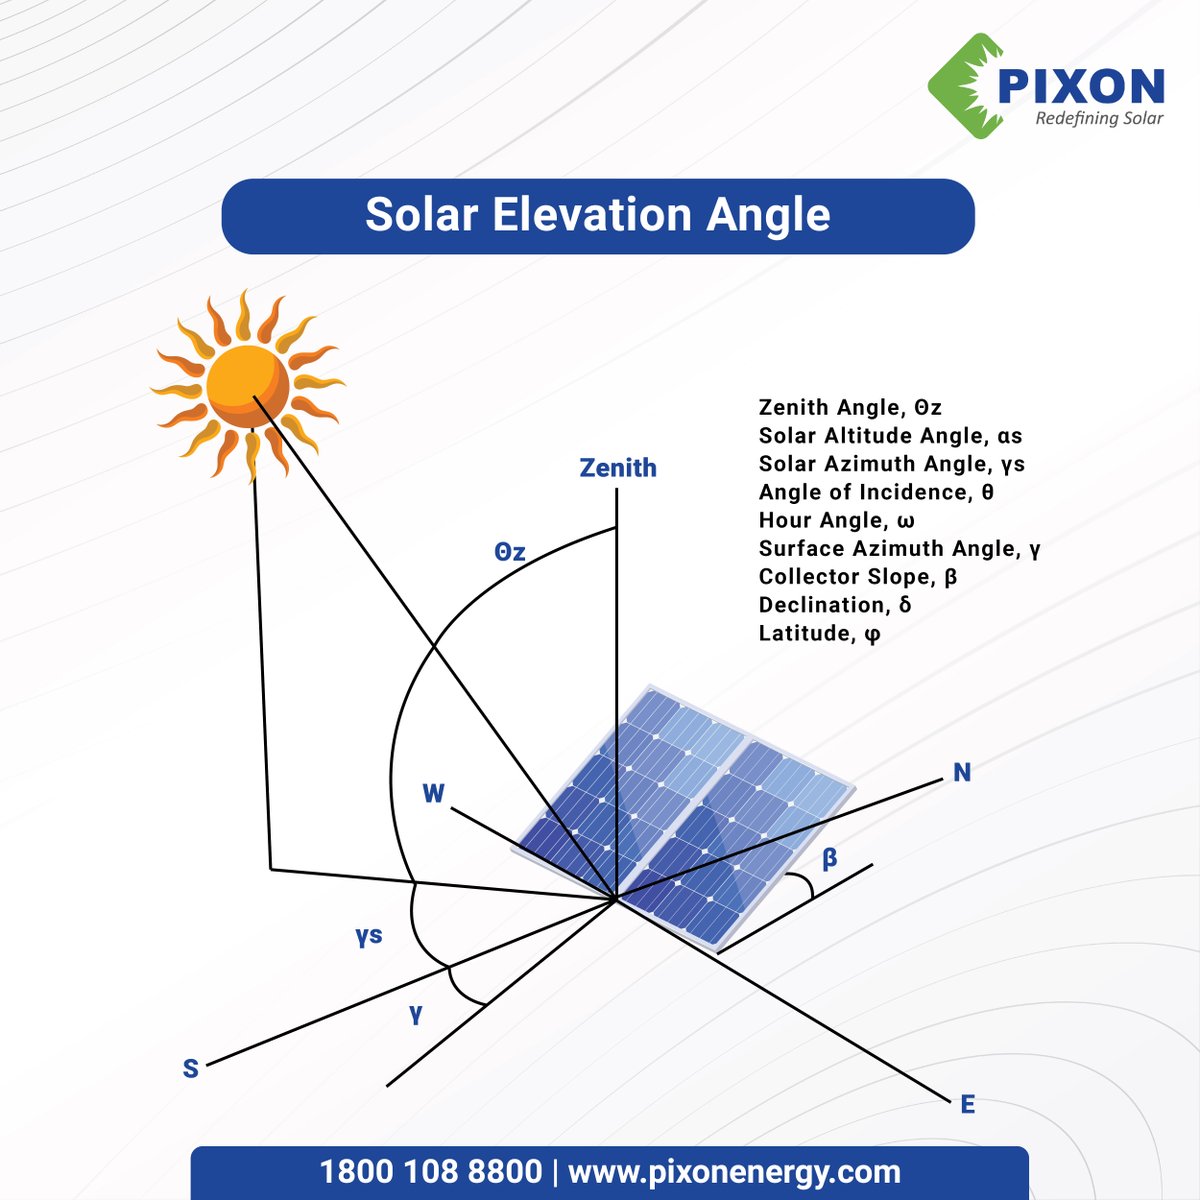 Discover how the solar elevation angle impacts your energy capture. 

This infographic breaks it all down, helping you optimize your solar panels for maximum efficiency.

#pixonenergy #solarpower #solarpanels #solarenergy #angle #altitude #latitude #solarangle #sun #infographic